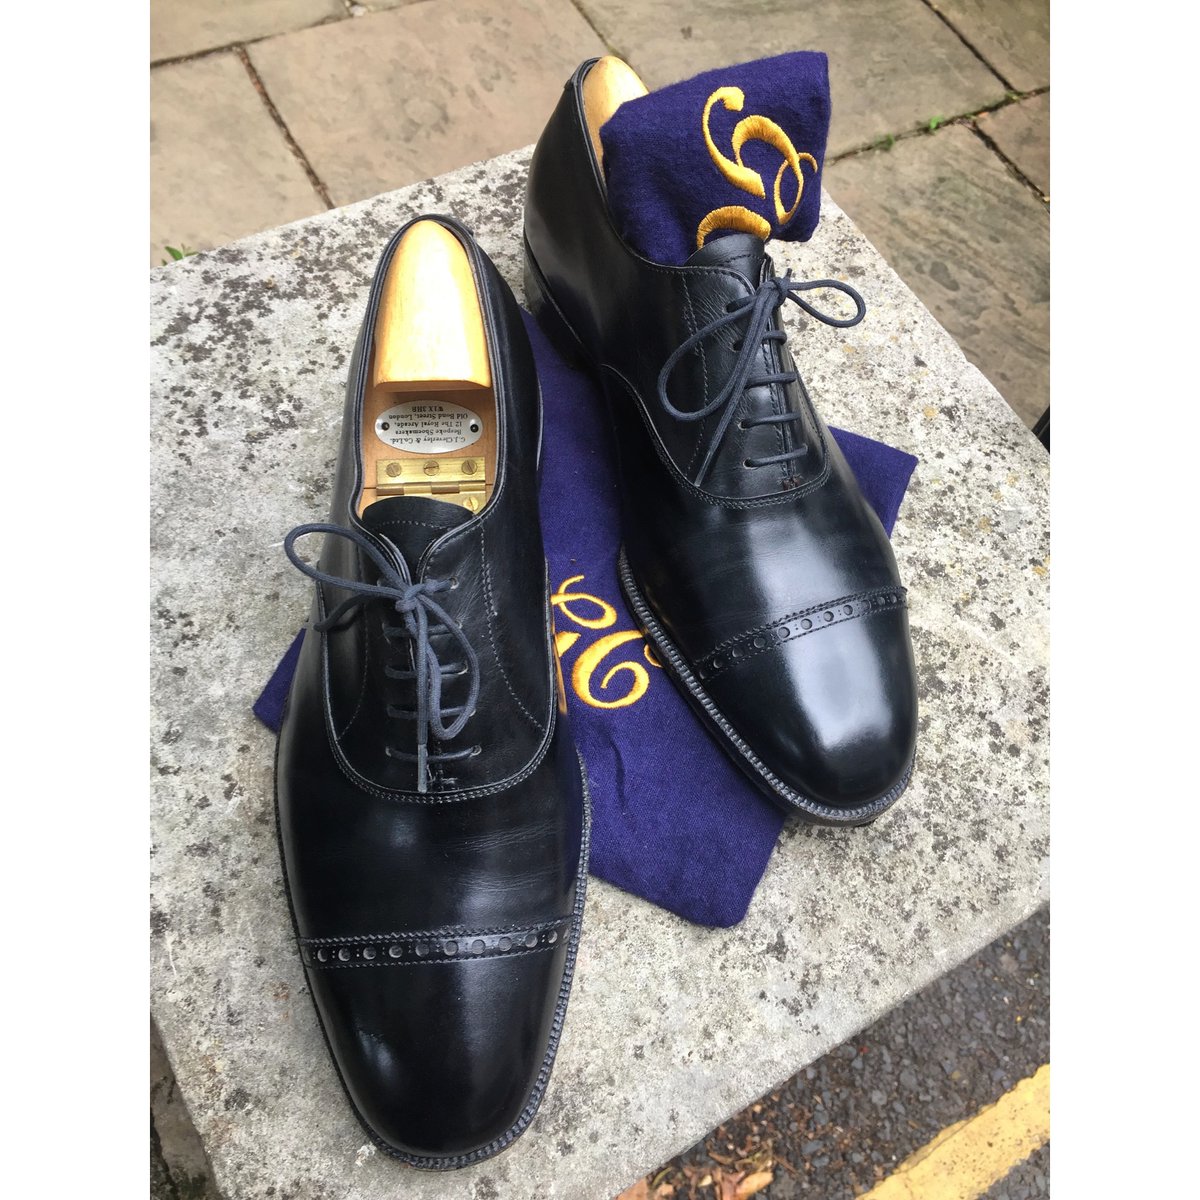 Bespoke shoes by George Cleverley 